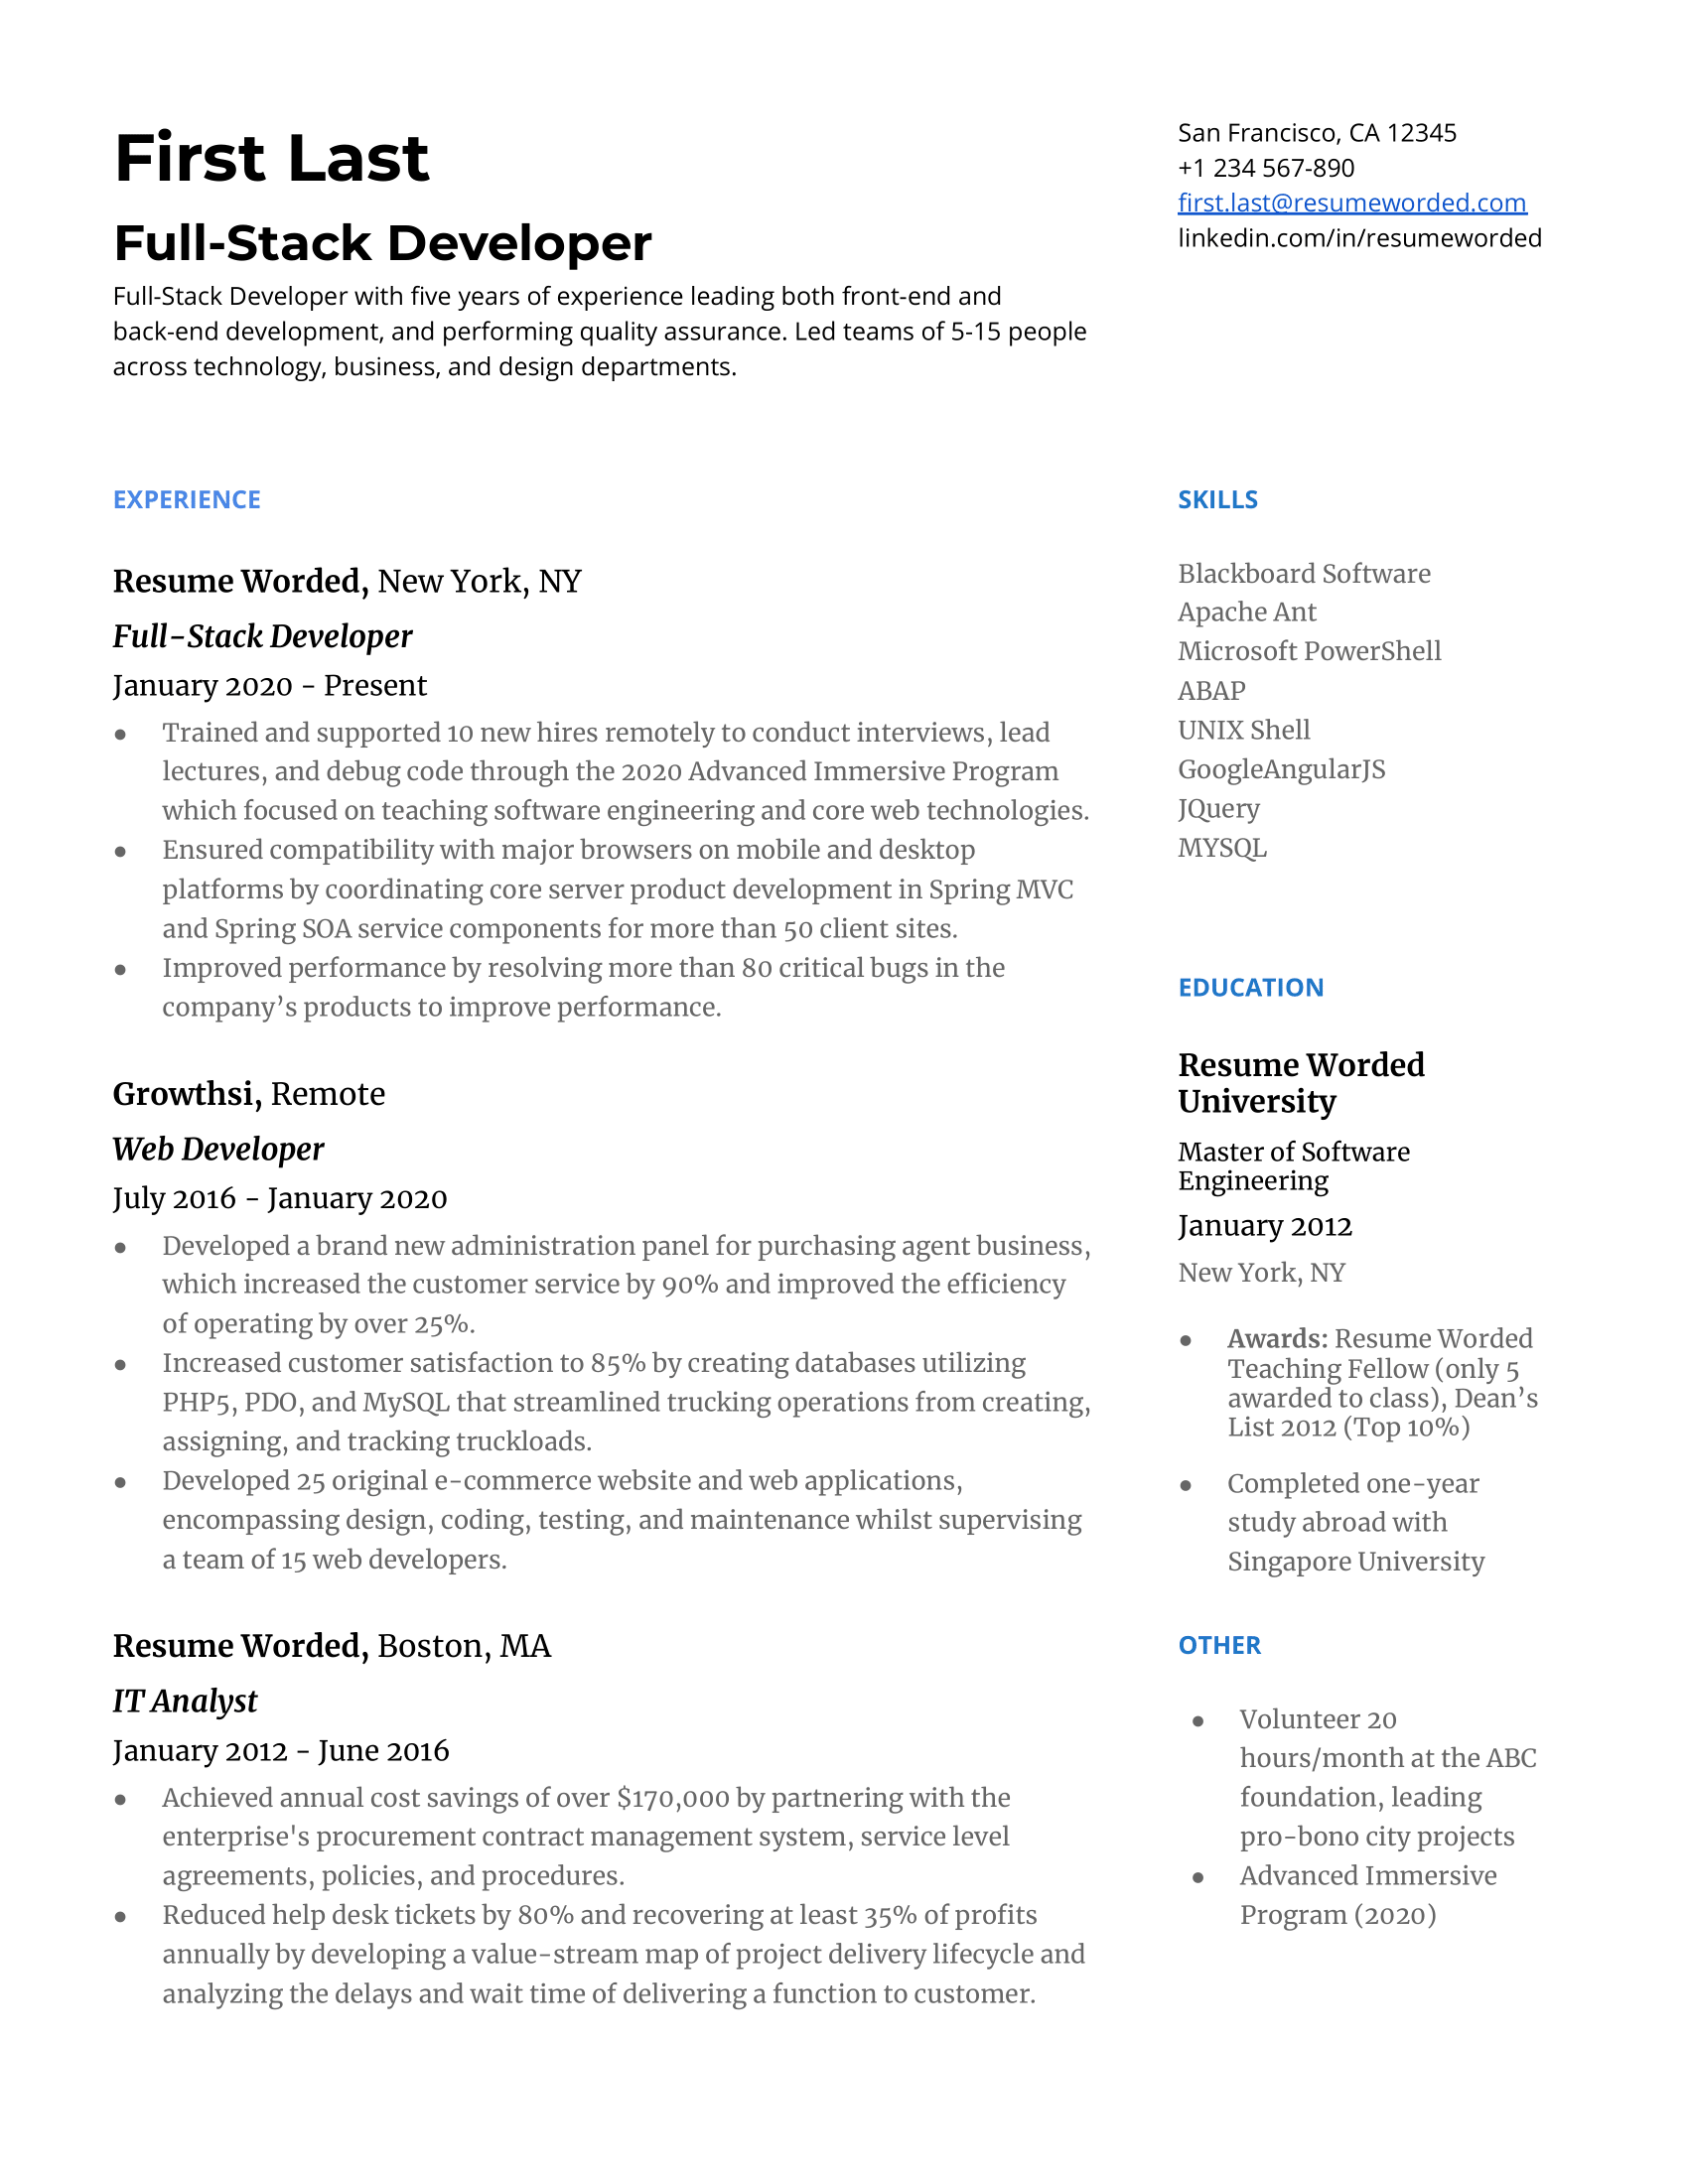 A full stack developer resume template including front end and backend skills.